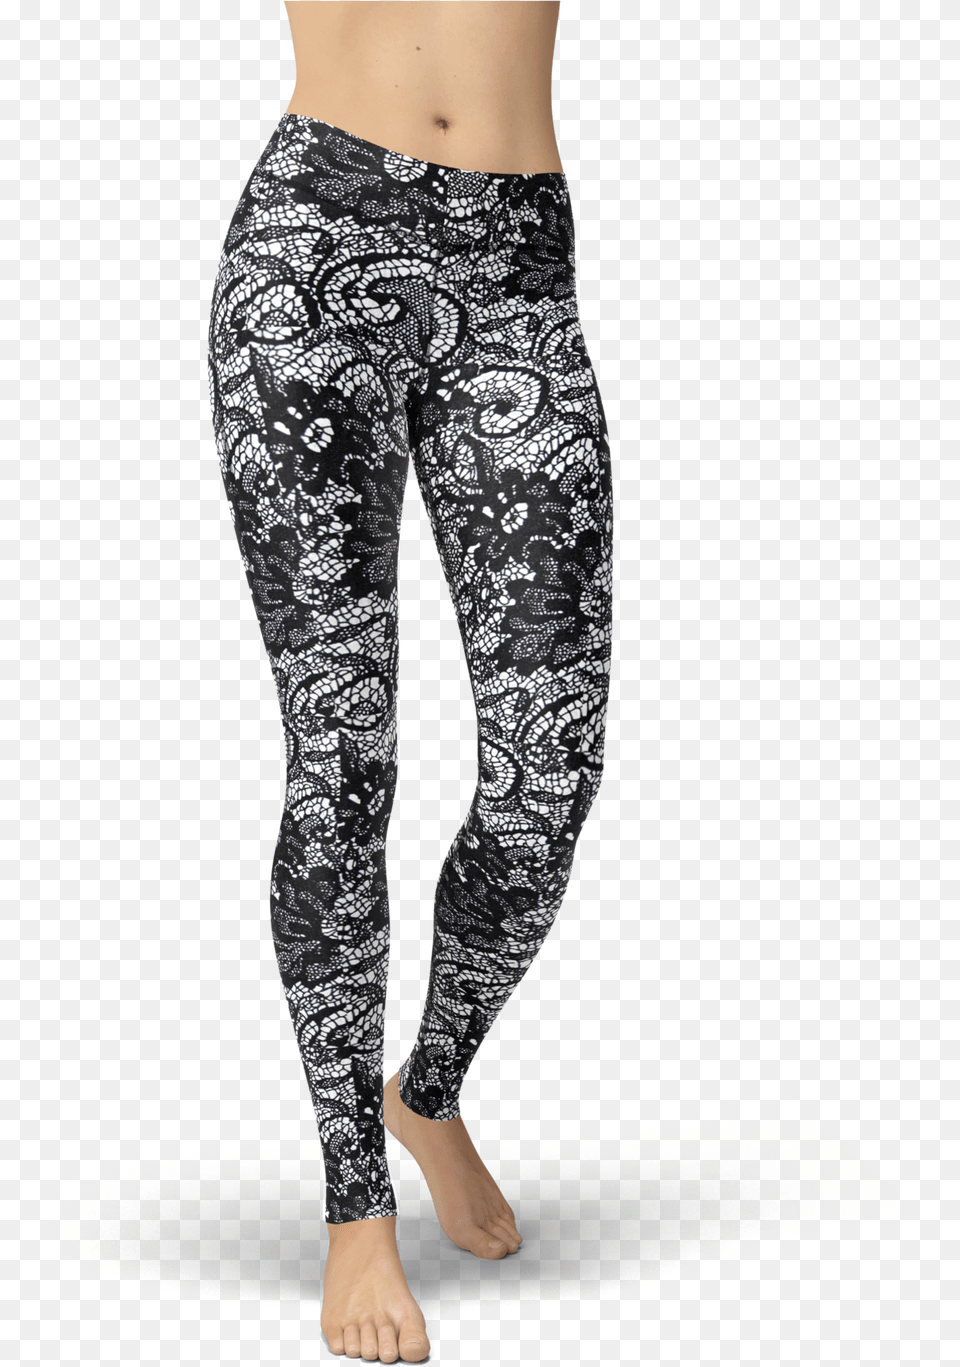 Catrina Black Lace Seahorse Xxxx Large Tall, Clothing, Hosiery, Tights, Pants Png Image